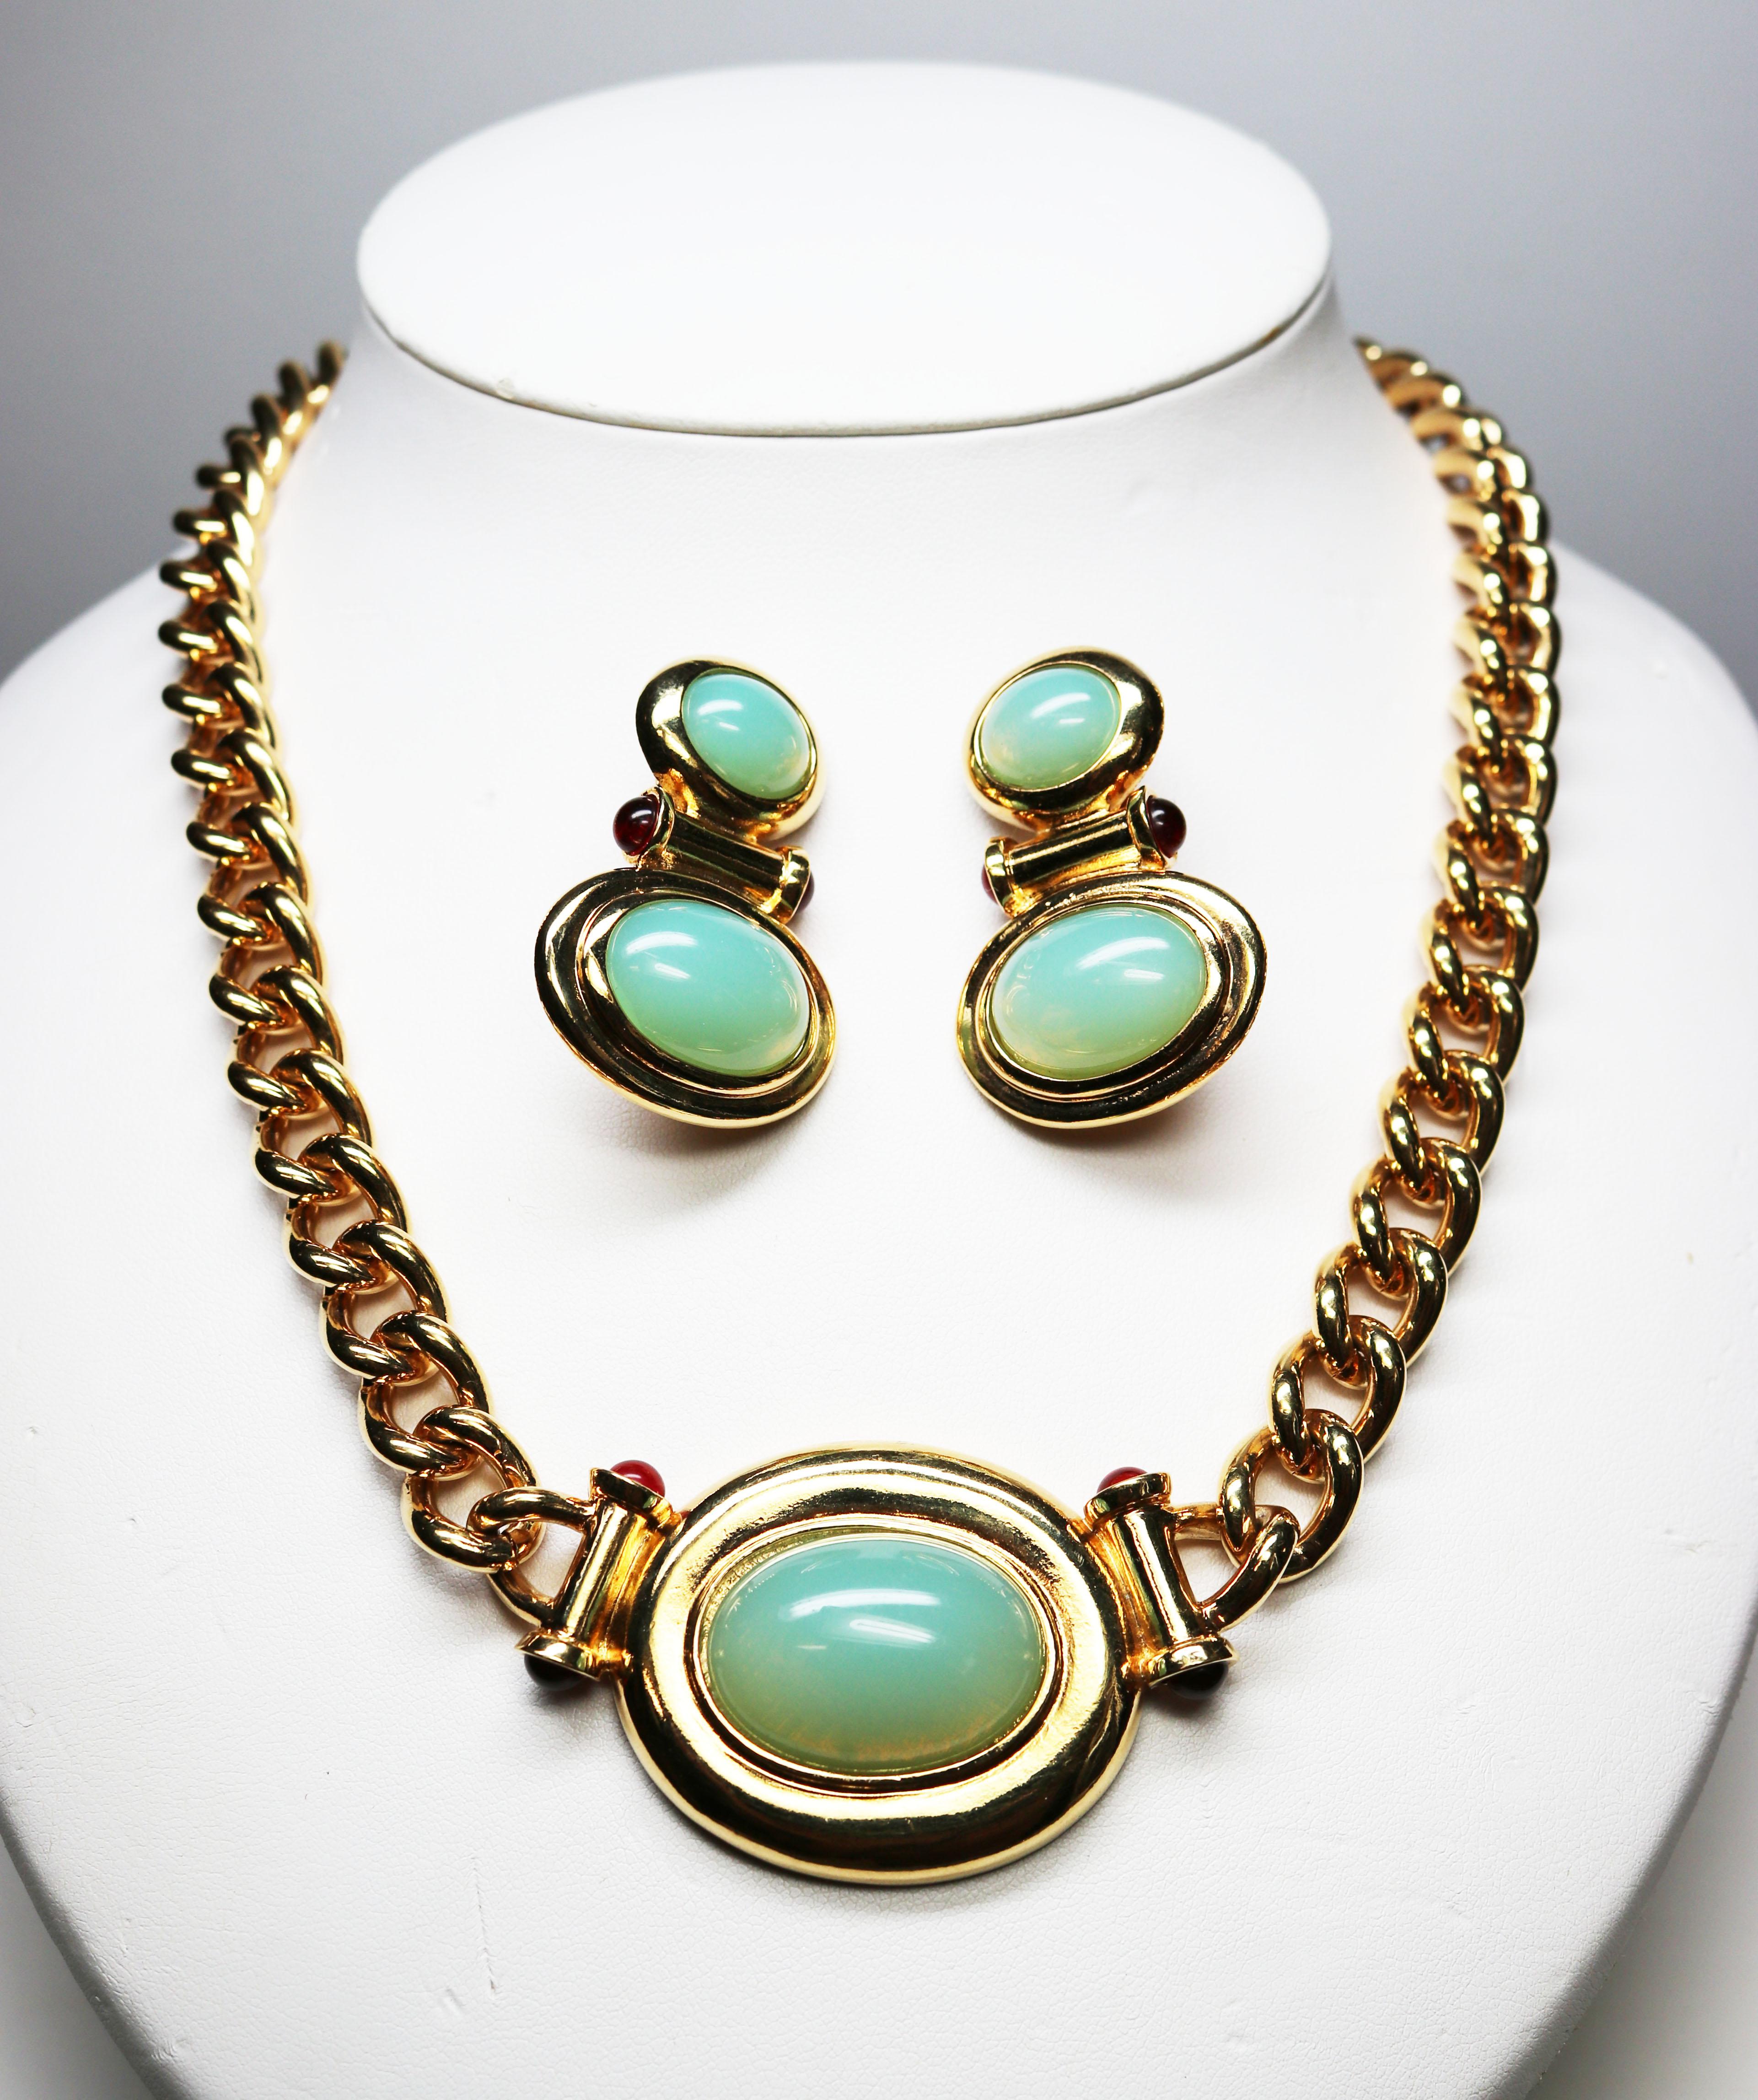 This beautiful Elizabeth Taylor for Avon Demi parure features simulated Peking glass cabochons, which resemble large opals. The gorgeous, golden, chunky chain is New York City style with golden columns and simulated ruby cabochons framing the